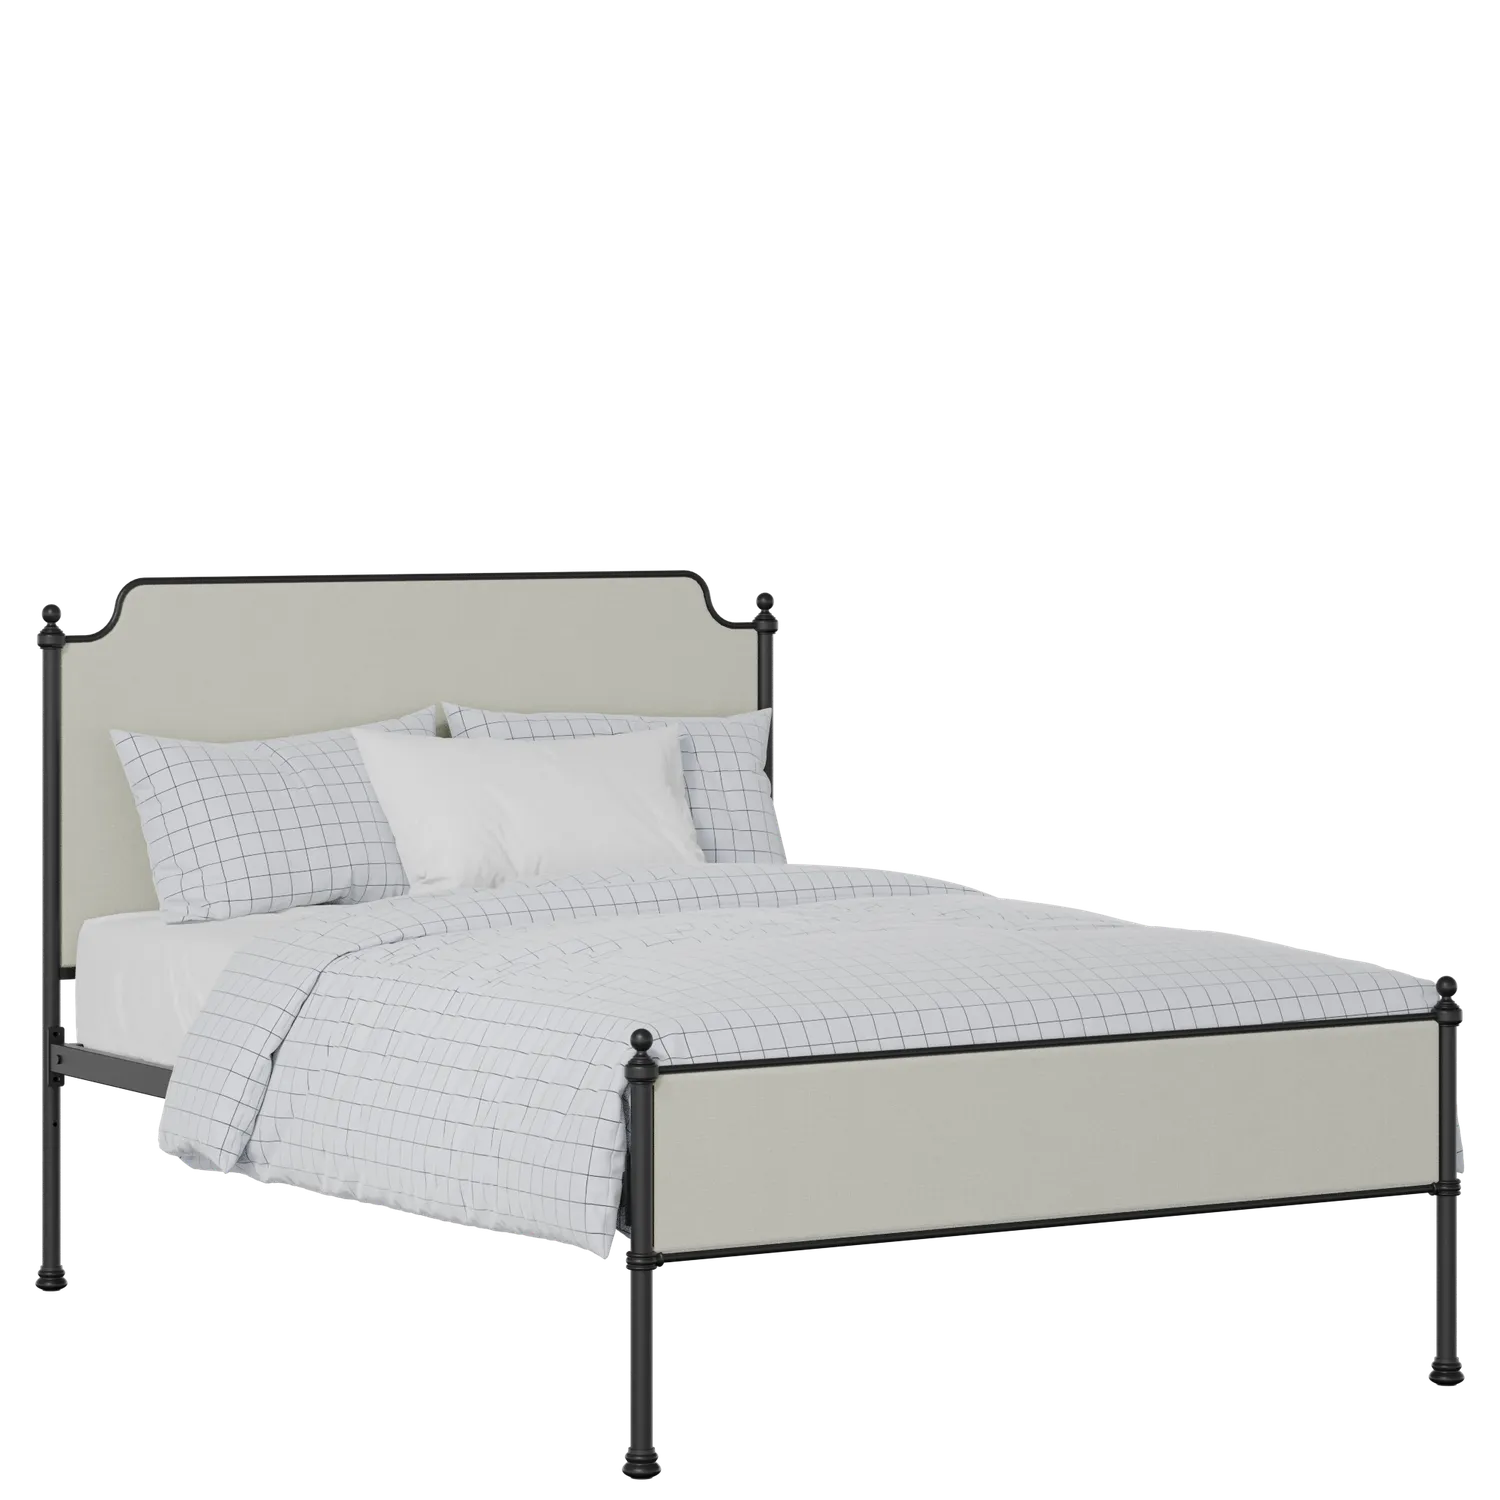 Miranda Slim iron/metal upholstered bed in black with oatmeal fabric